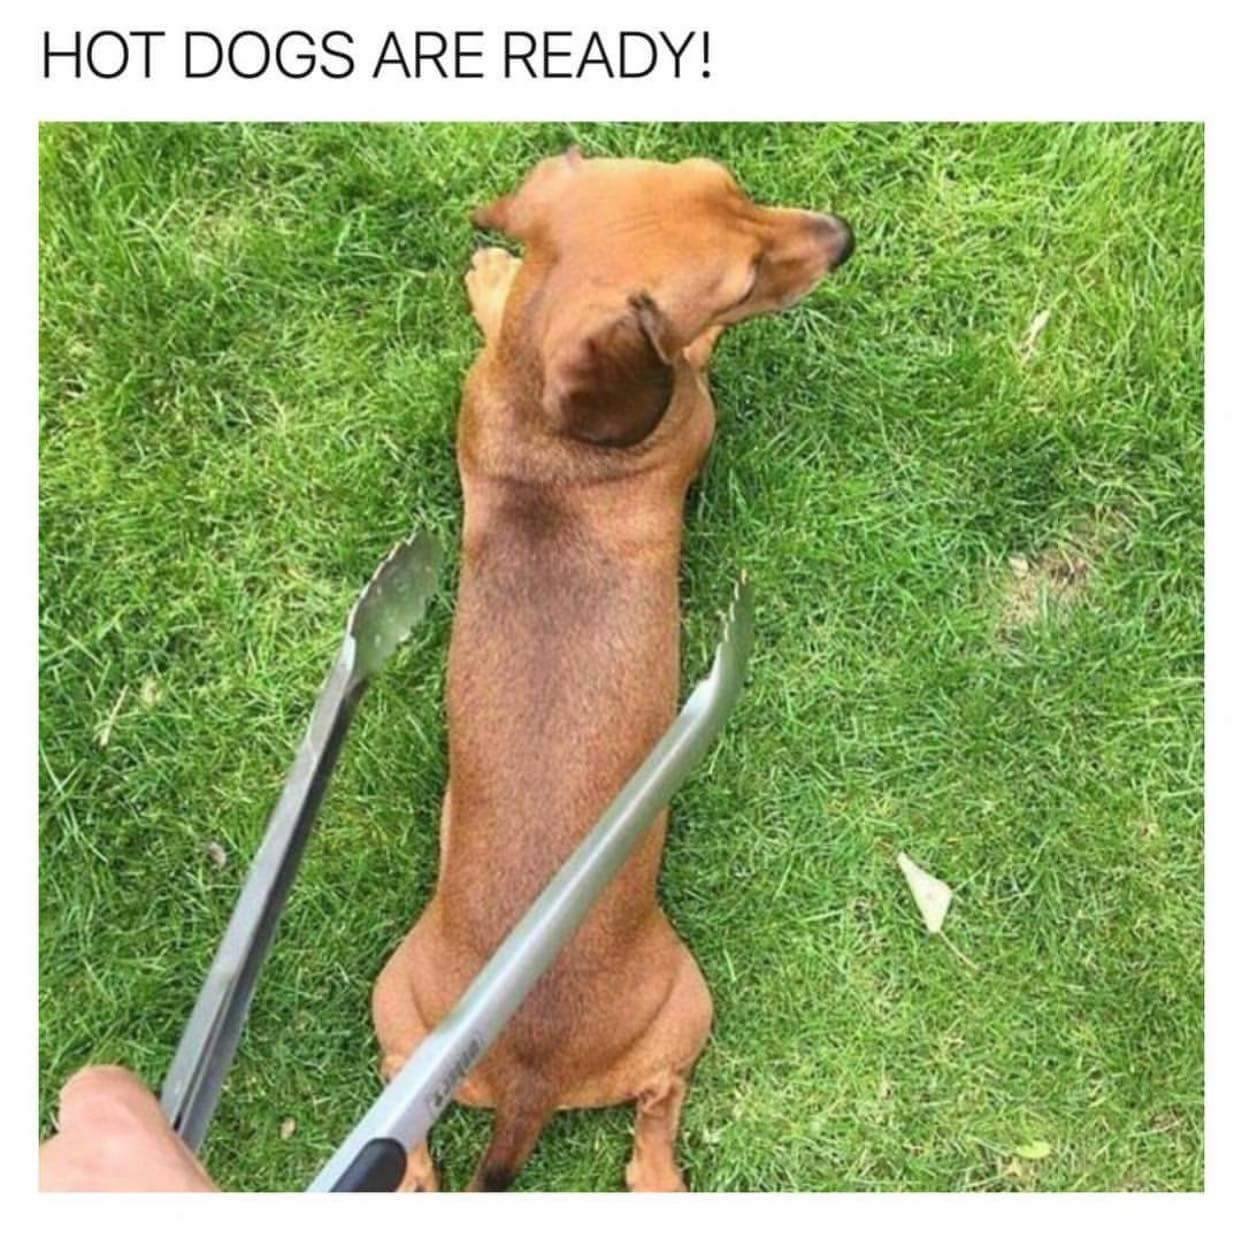 hot dog meme - Hot Dogs Are Ready!